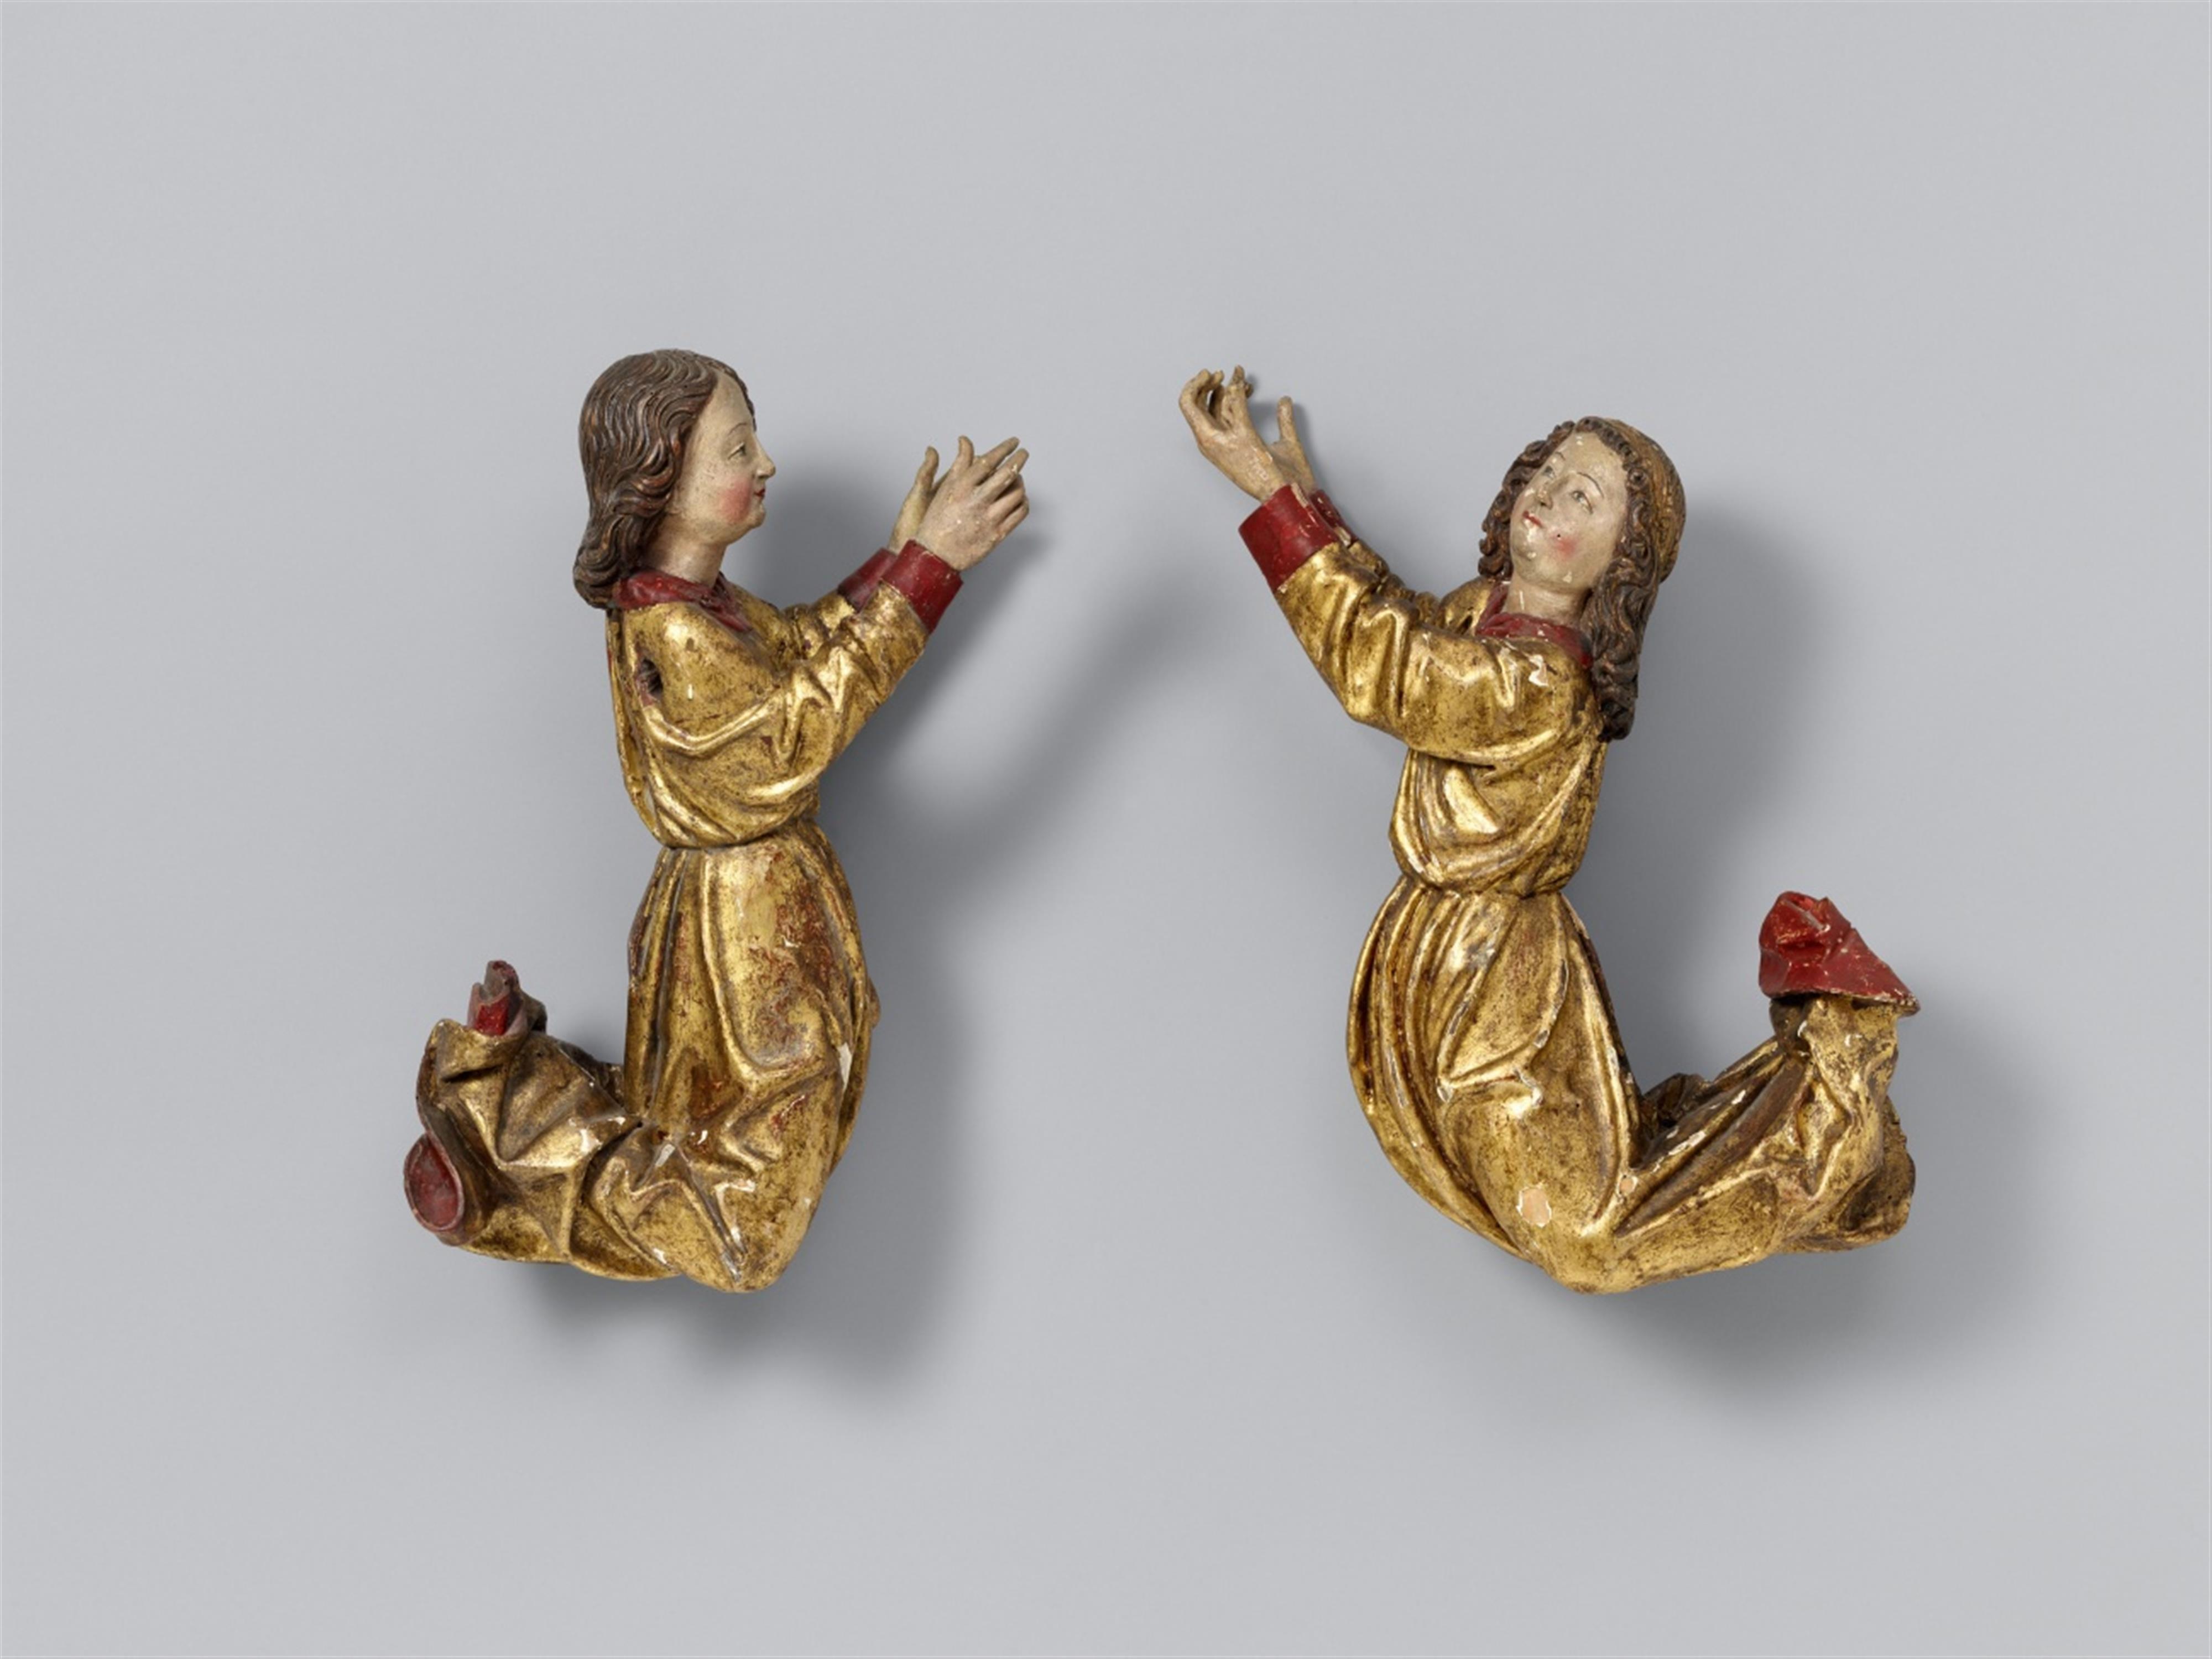 Probably West Germany 2nd half 15th century - A pair of carved wooden angels, probably West German, second half 15th century - image-1